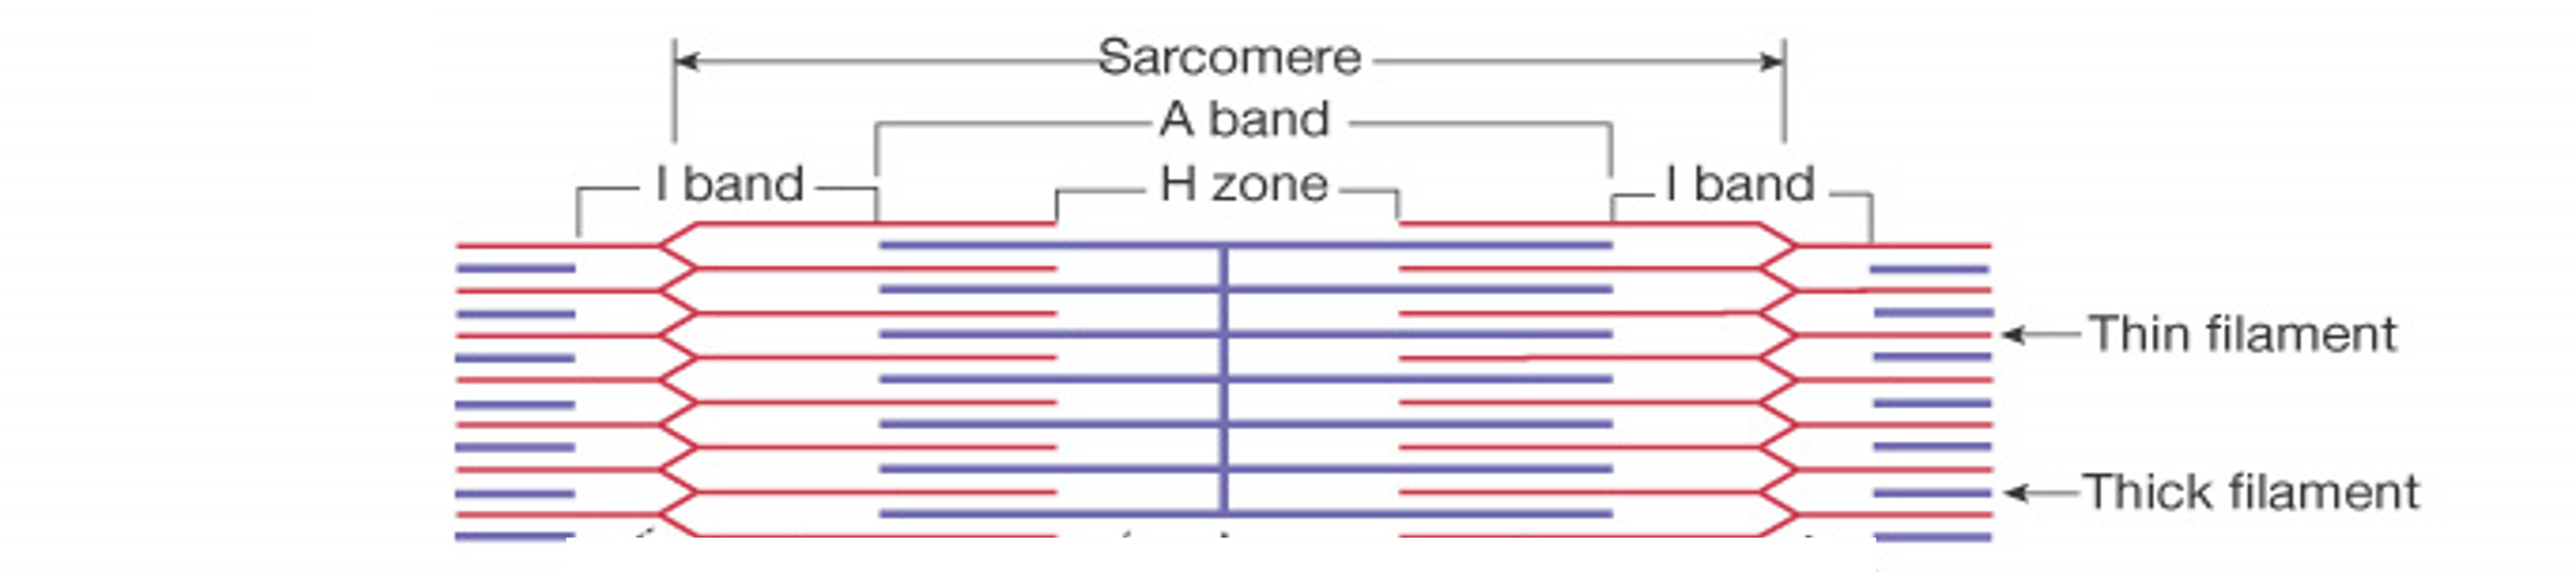 <p><mark data-color="blue">Sarcomeres: Structure (bands and zones)</mark></p><p>Can you label, describe and explain what this diagram is/shows?</p>